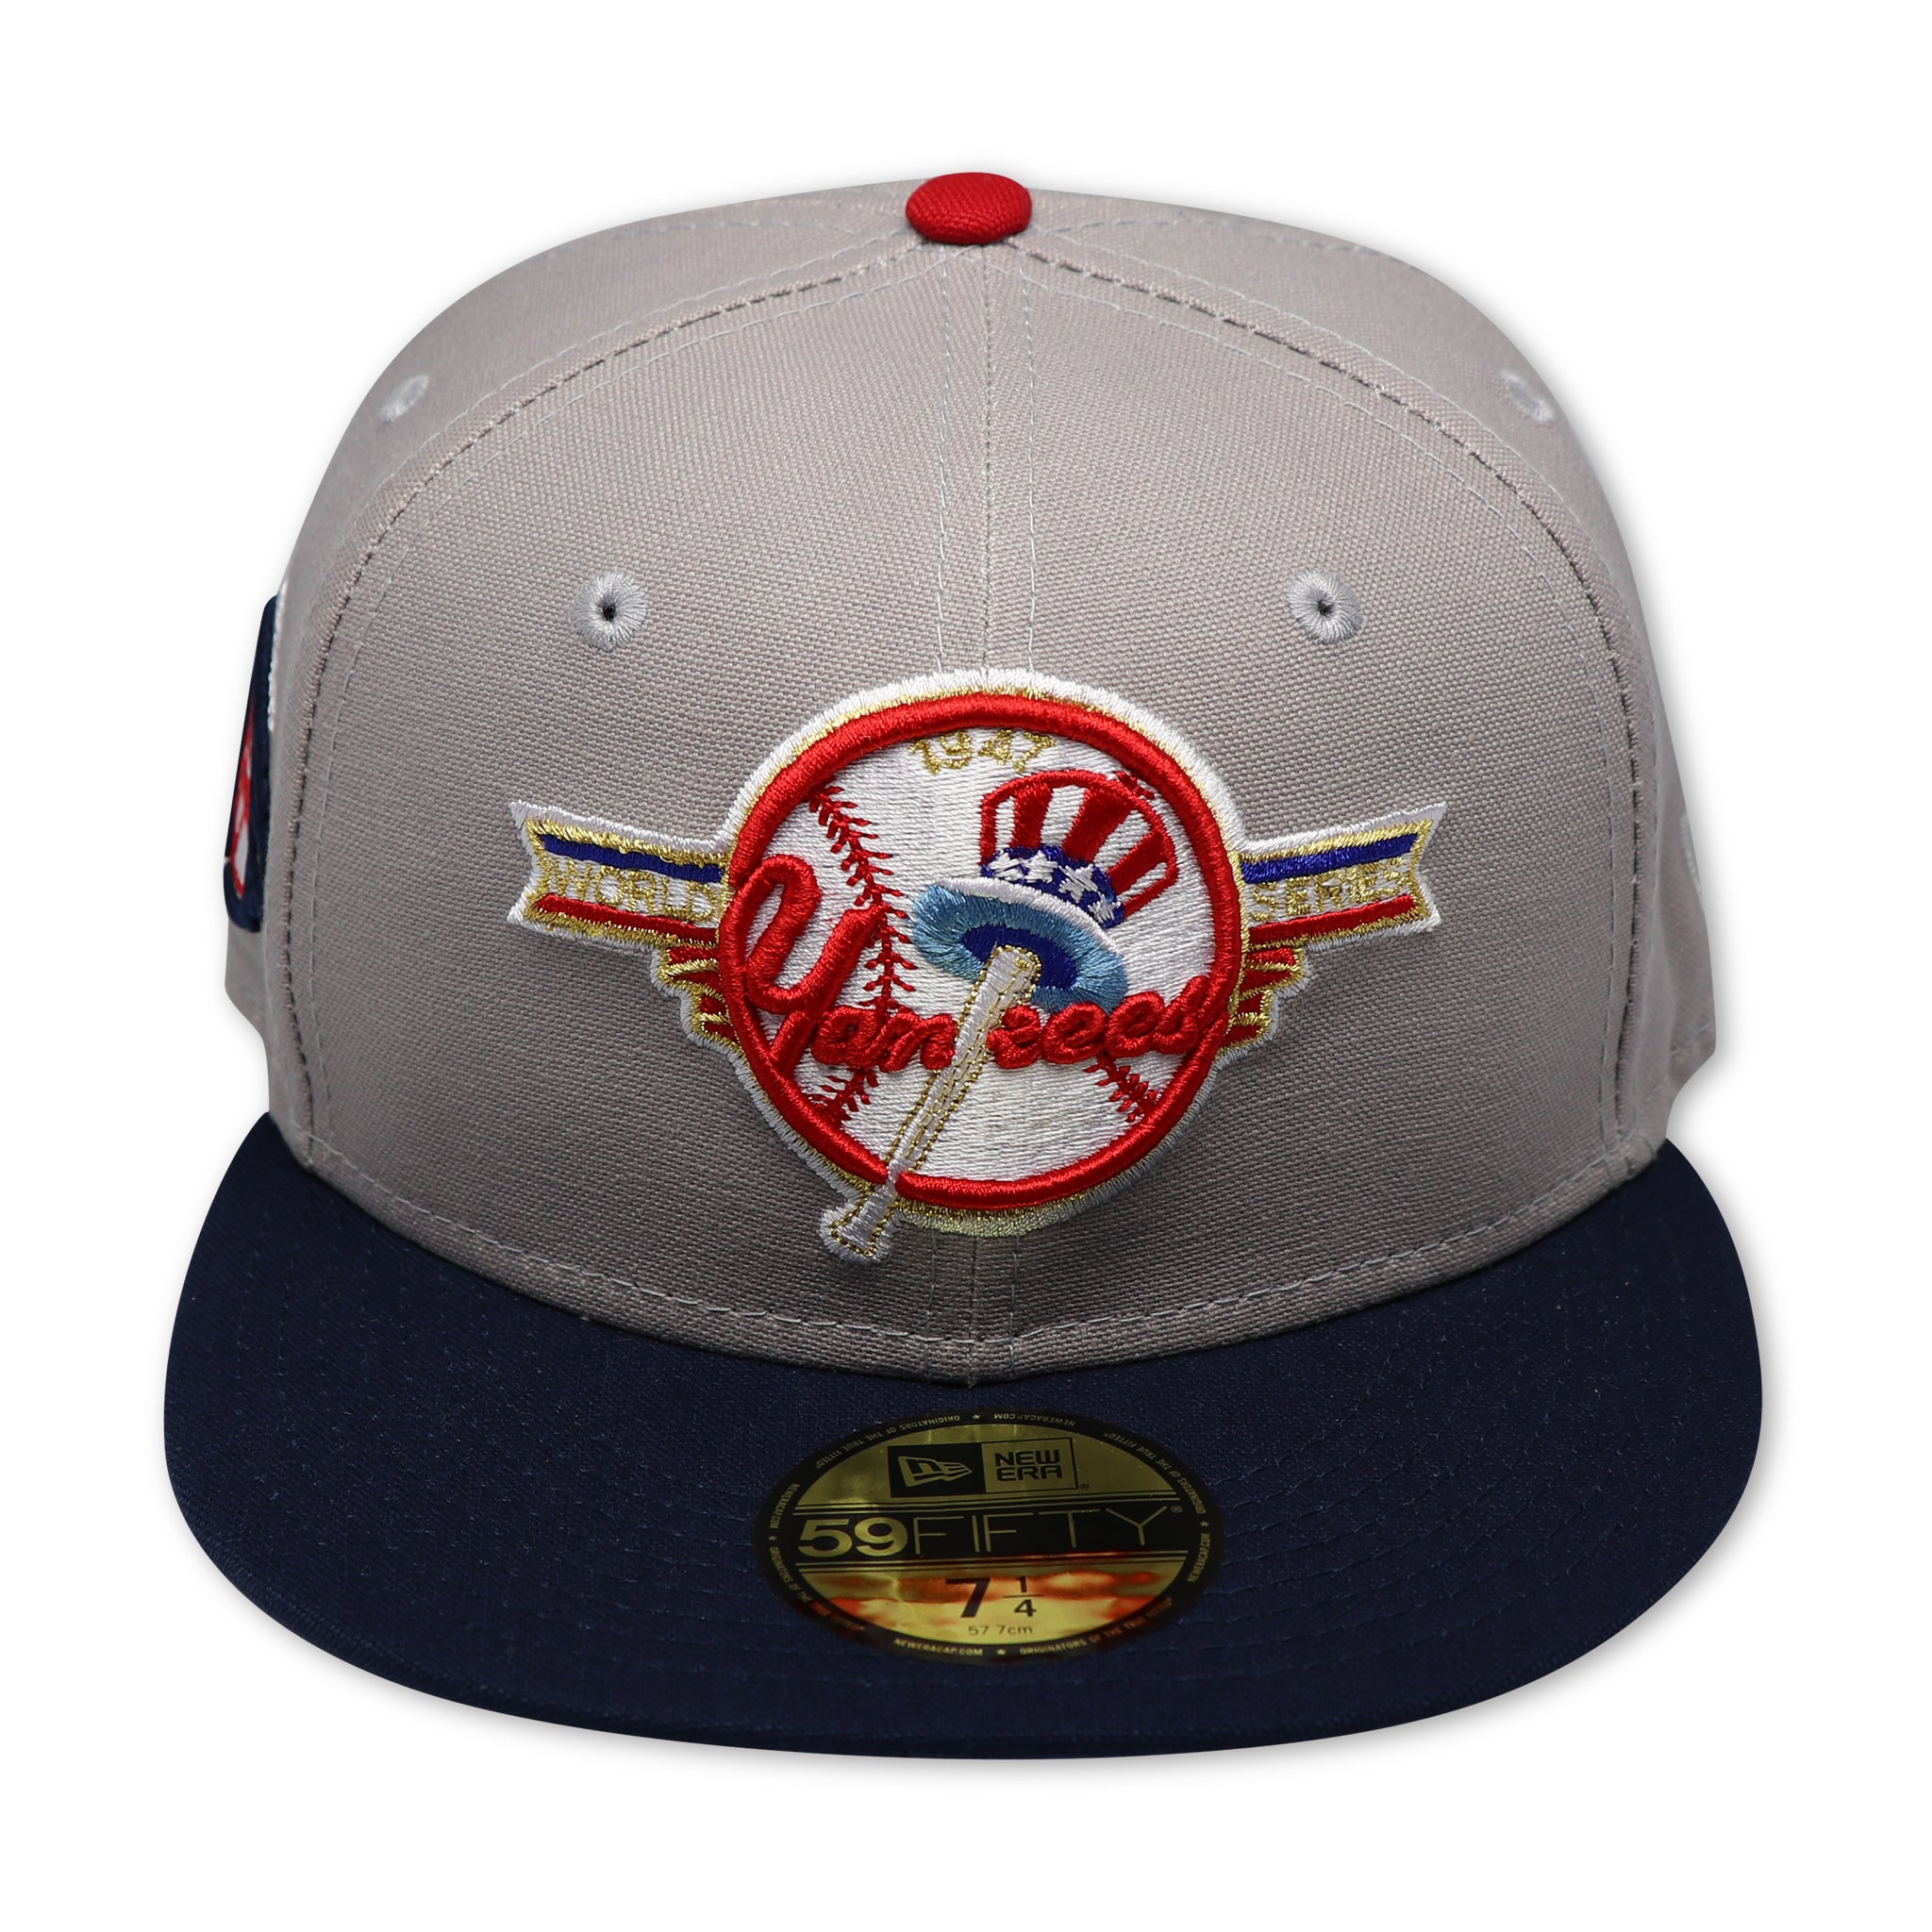 NEW YORK YANKEES "ROAD" (1947 WORLDSERIES) NEW ERA 59FIFTY FITTED (SKY BLUE UNDER VISOR)